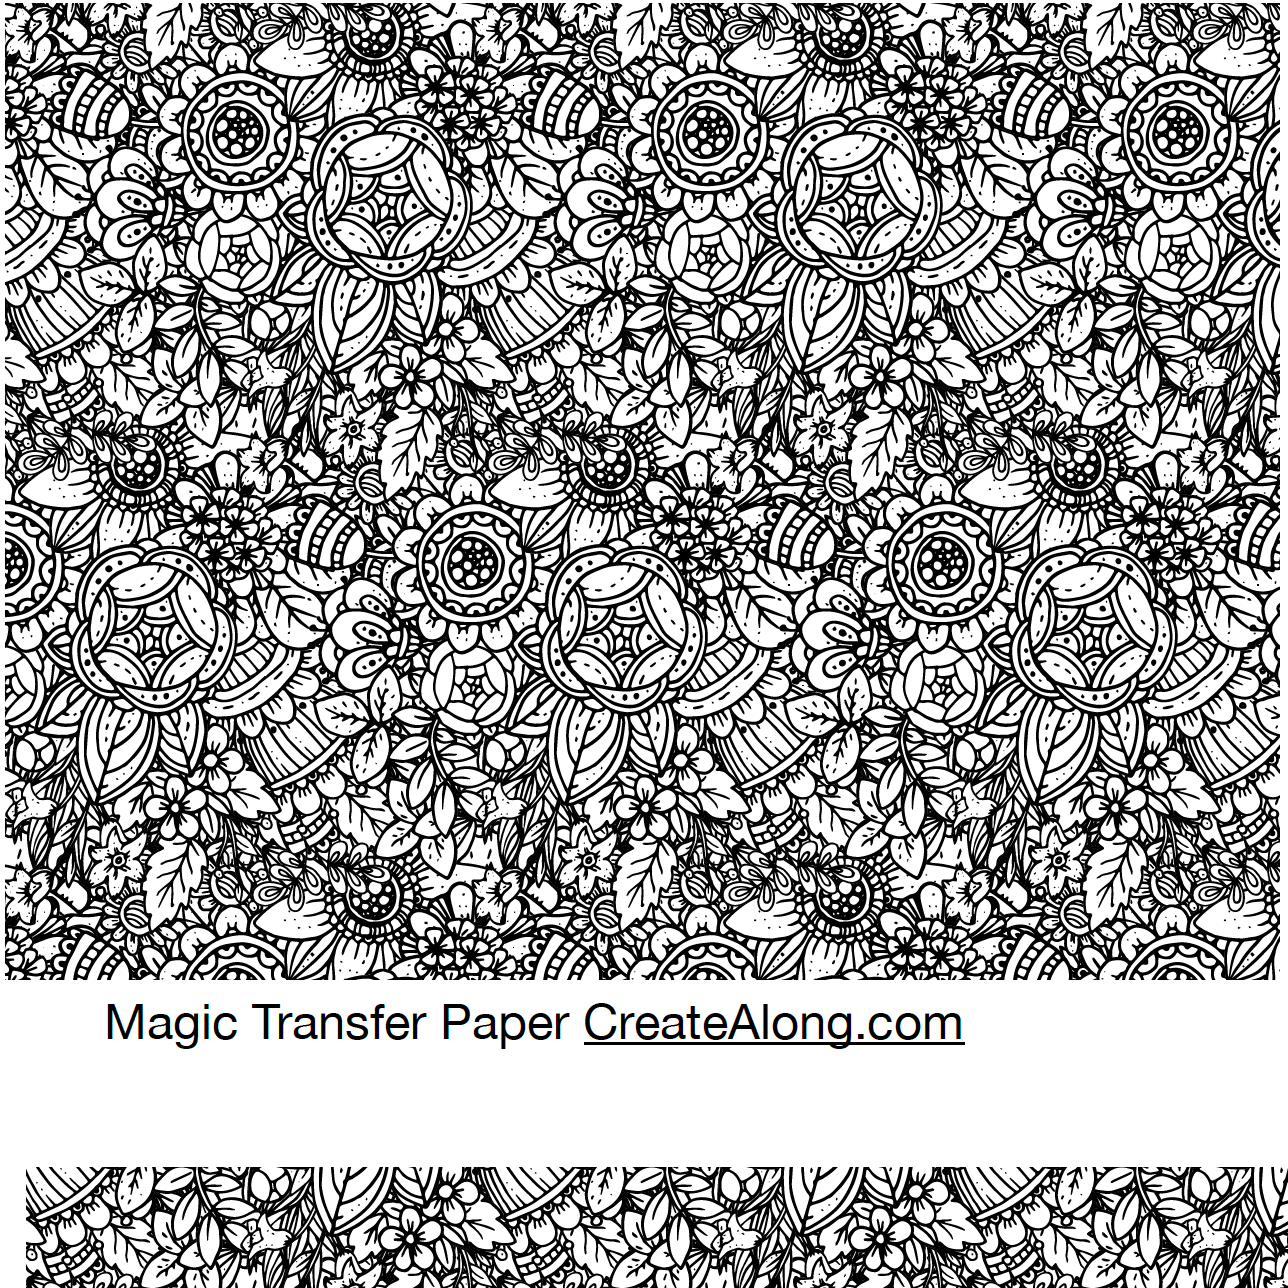 Digital April Flowers Image Transfer PDF for creating images on raw polymer clay and for use with Magic Transfer Paper